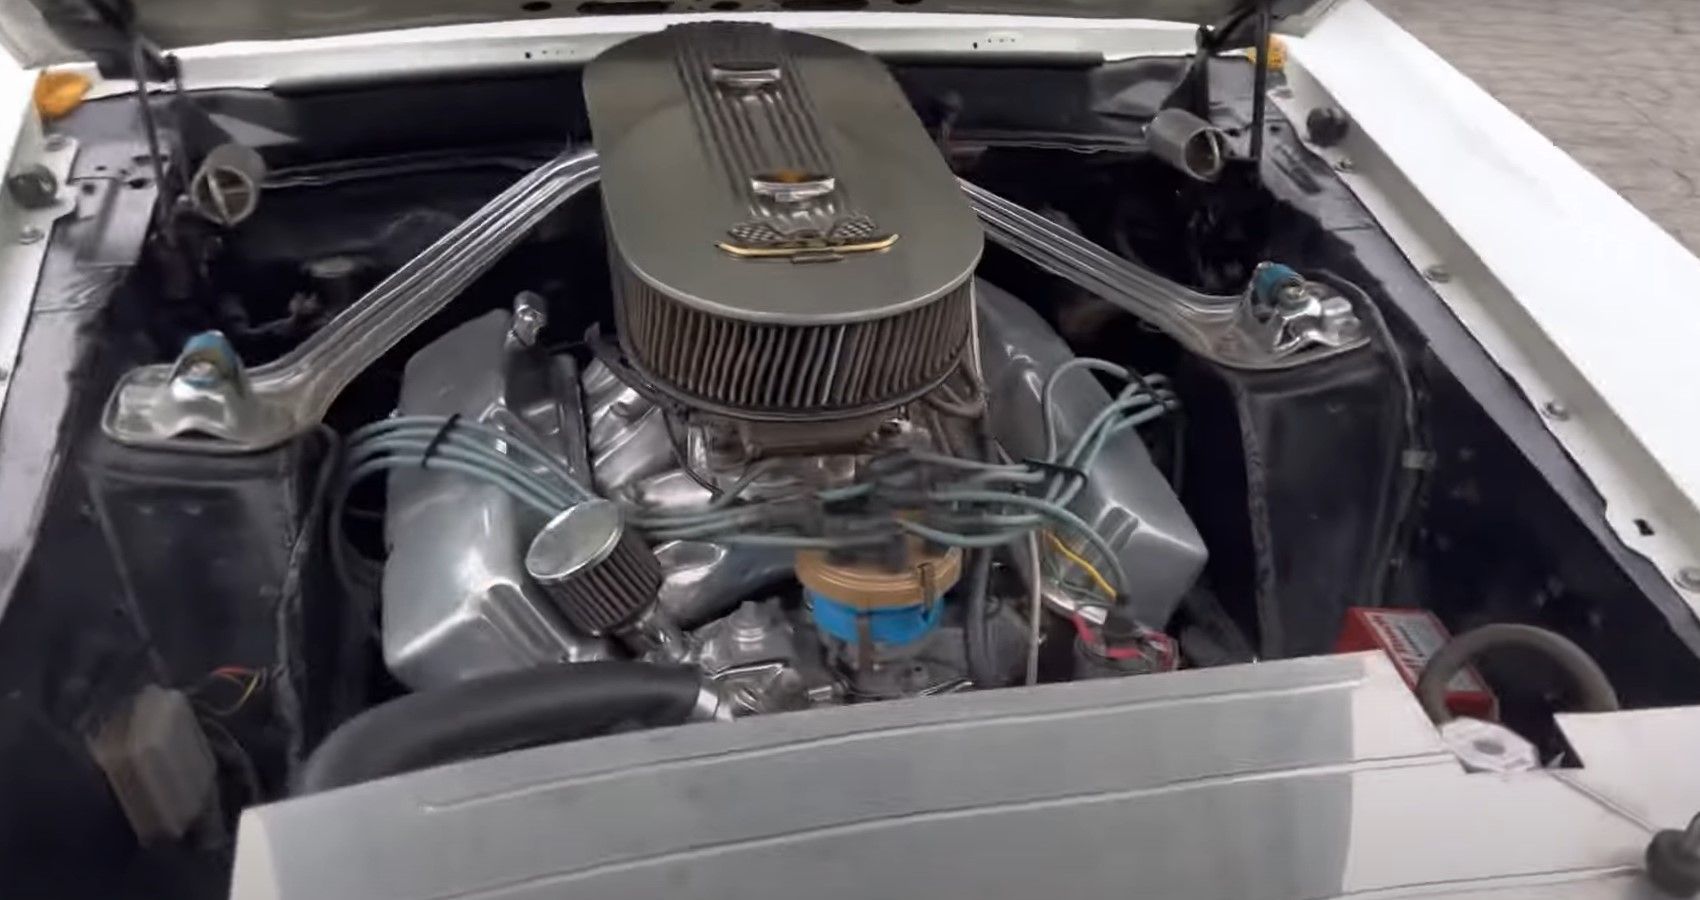 1969 Ford Mustang tunnel-port 427 FE Sideoiler engine